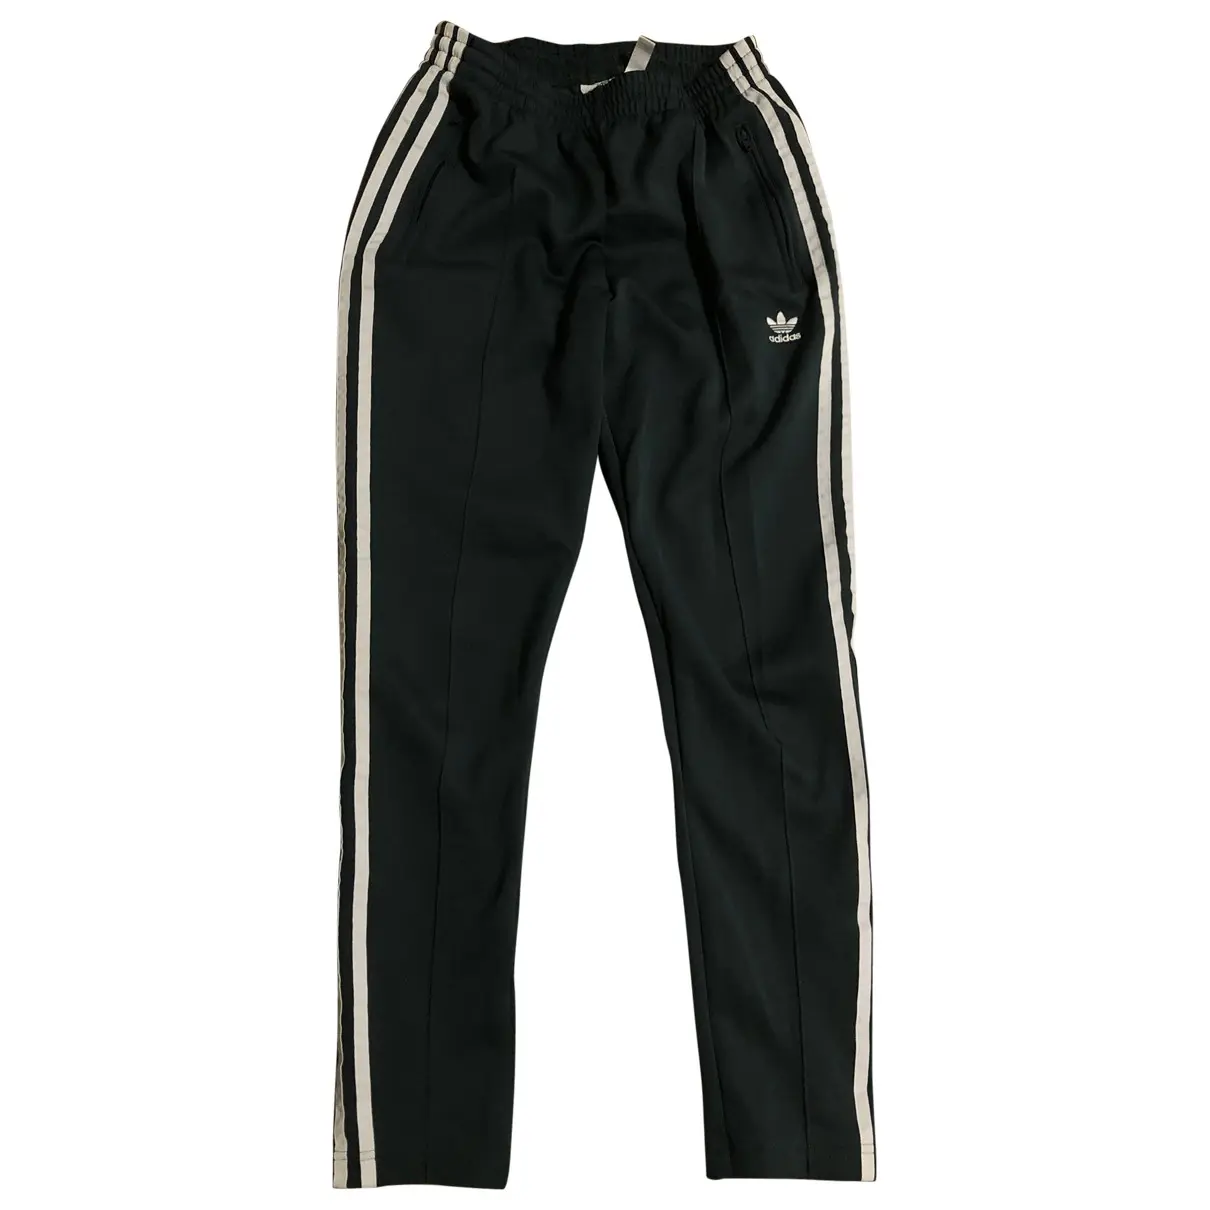 Cloth trousers Adidas